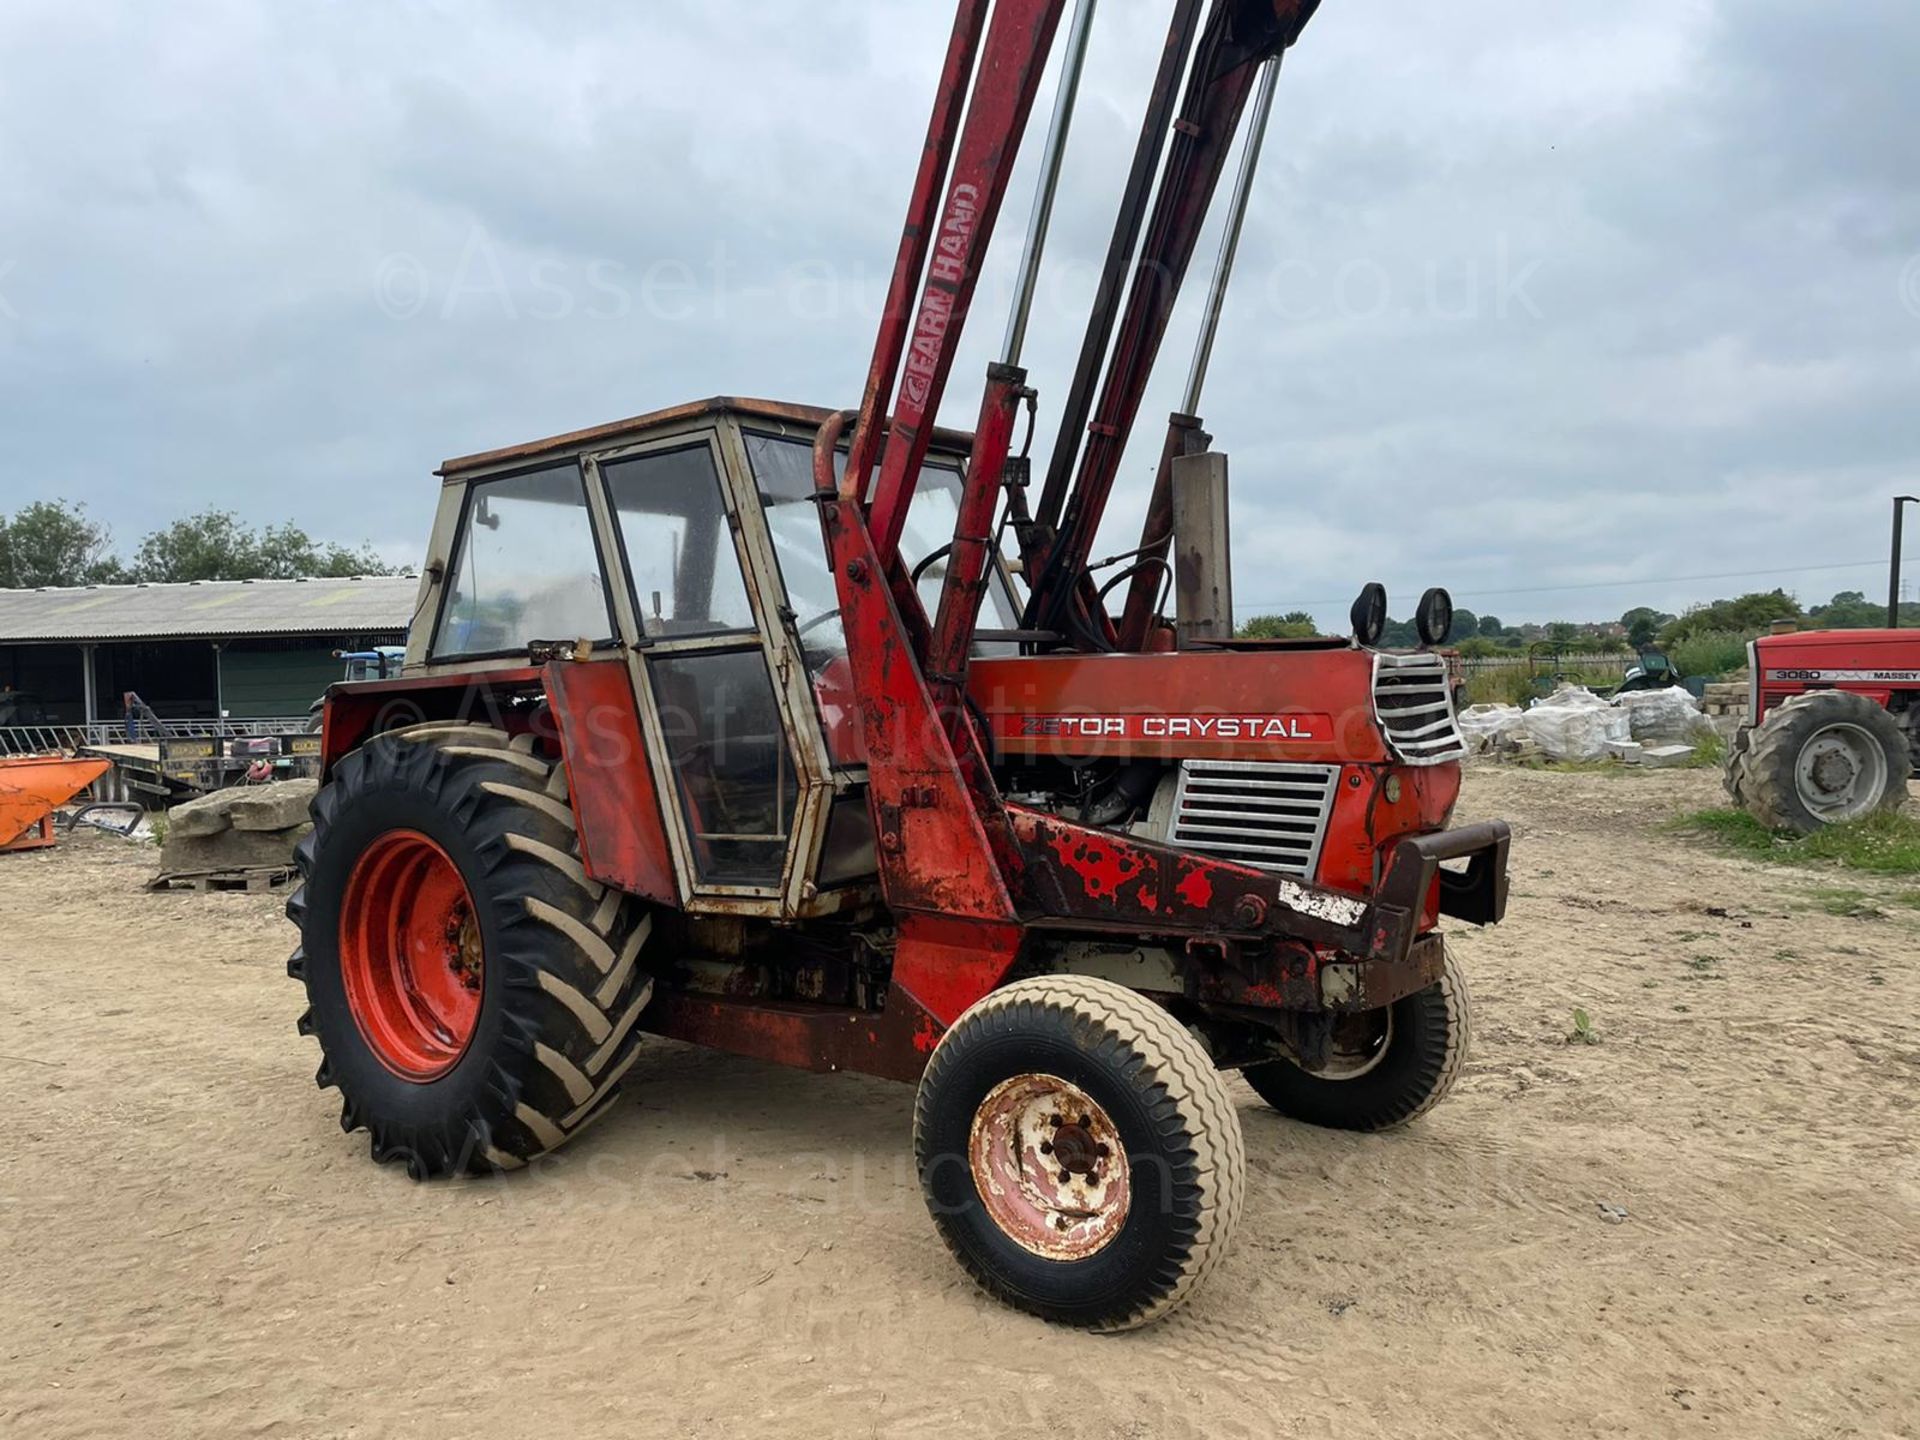 ZETOR CRYSTAL 8011 TRACTOR WITH LOADER, BALE SPIKE AND REAR WEIGHT, ROAD REGISTERED *PLUS VAT* - Image 2 of 10